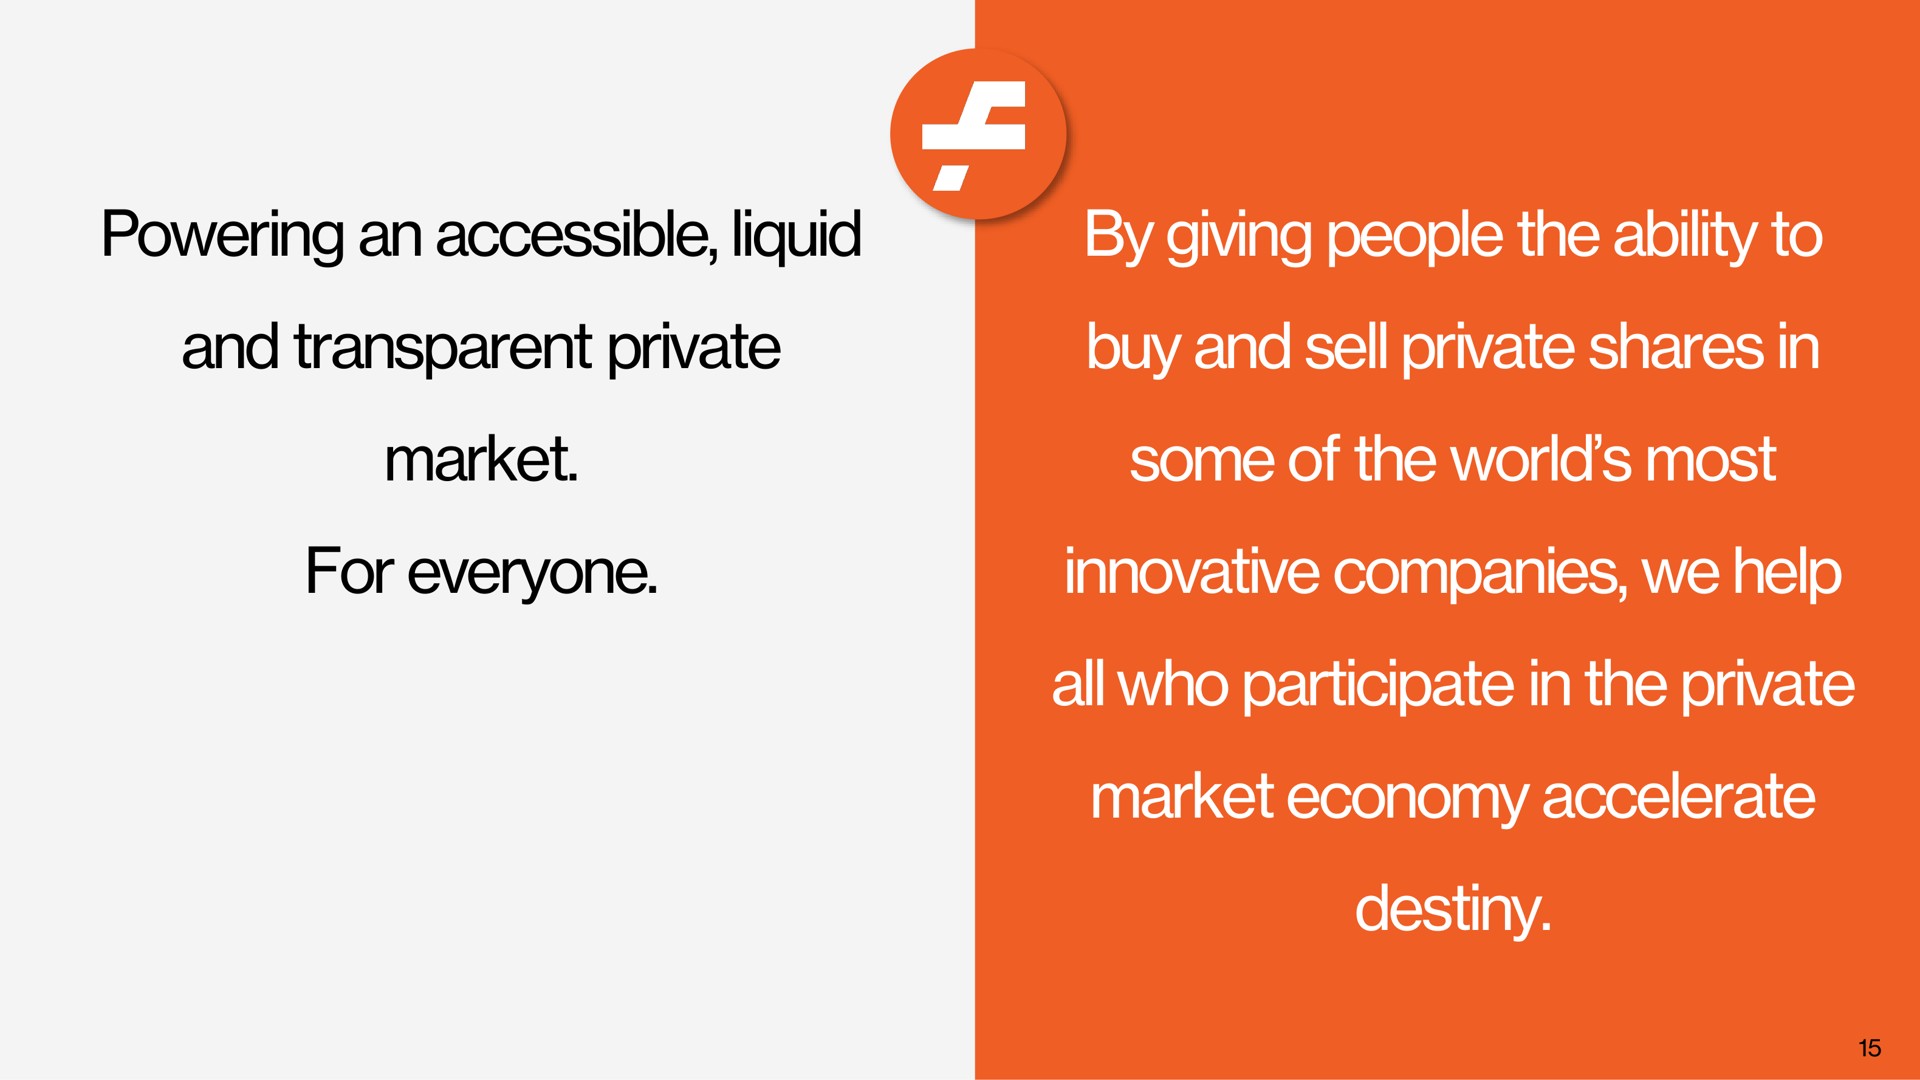 powering an accessible liquid by giving people the ability to and transparent private buy and sell private shares in market some of the world most for everyone innovative companies we help all who participate in the private market economy accelerate destiny lei | Forge